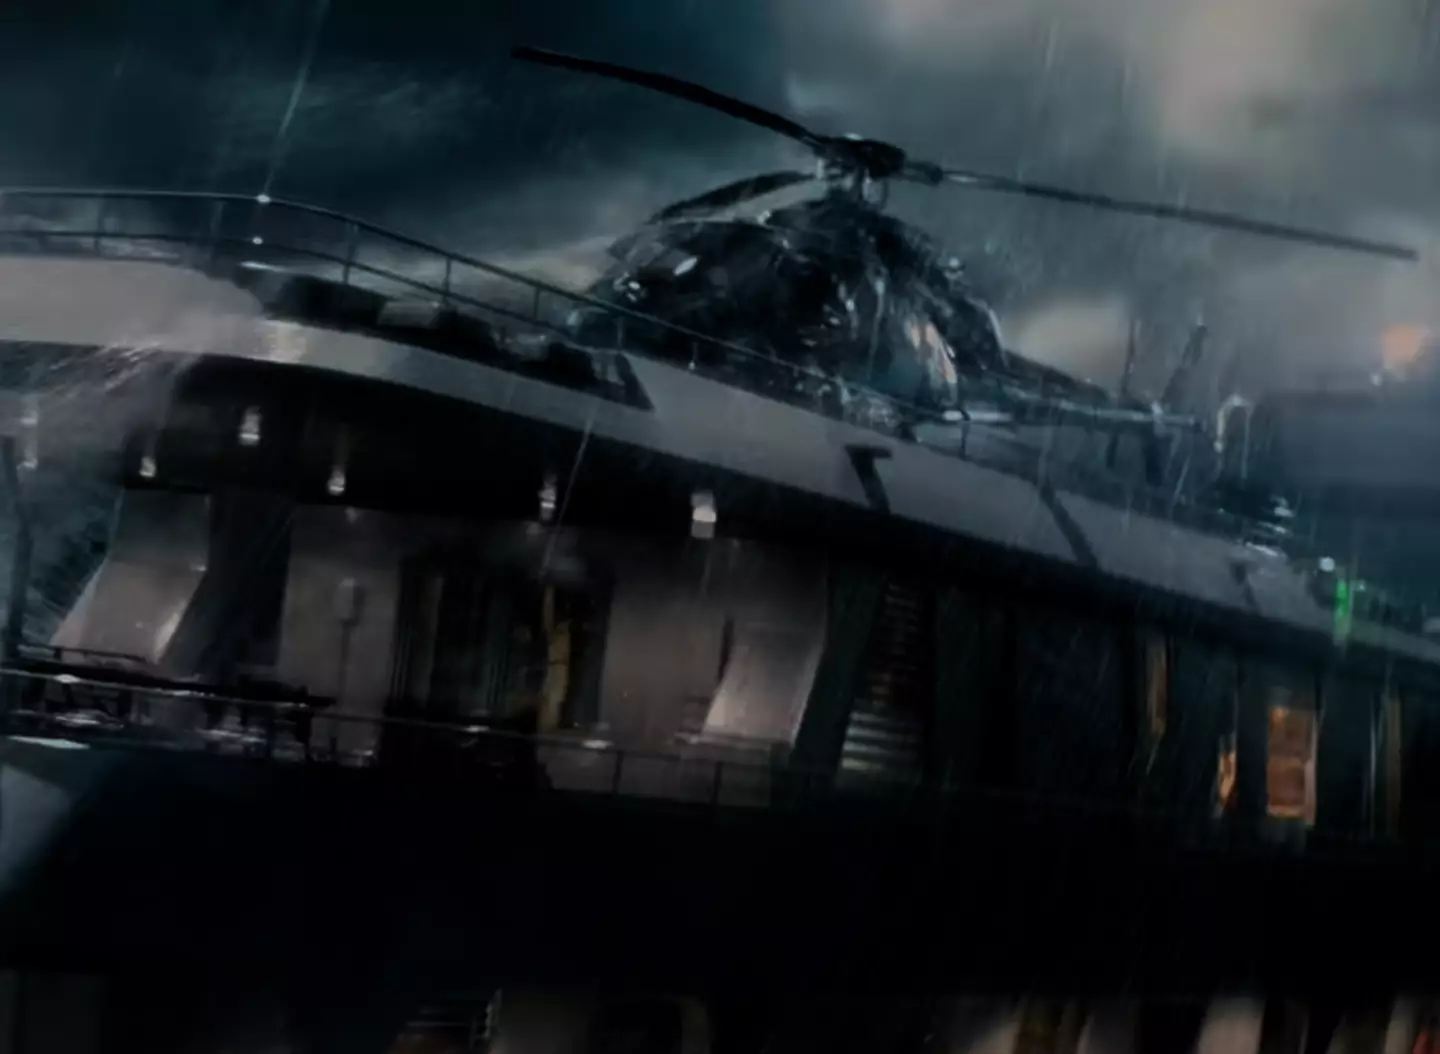 The yacht gets caught in a massive storm in the film.